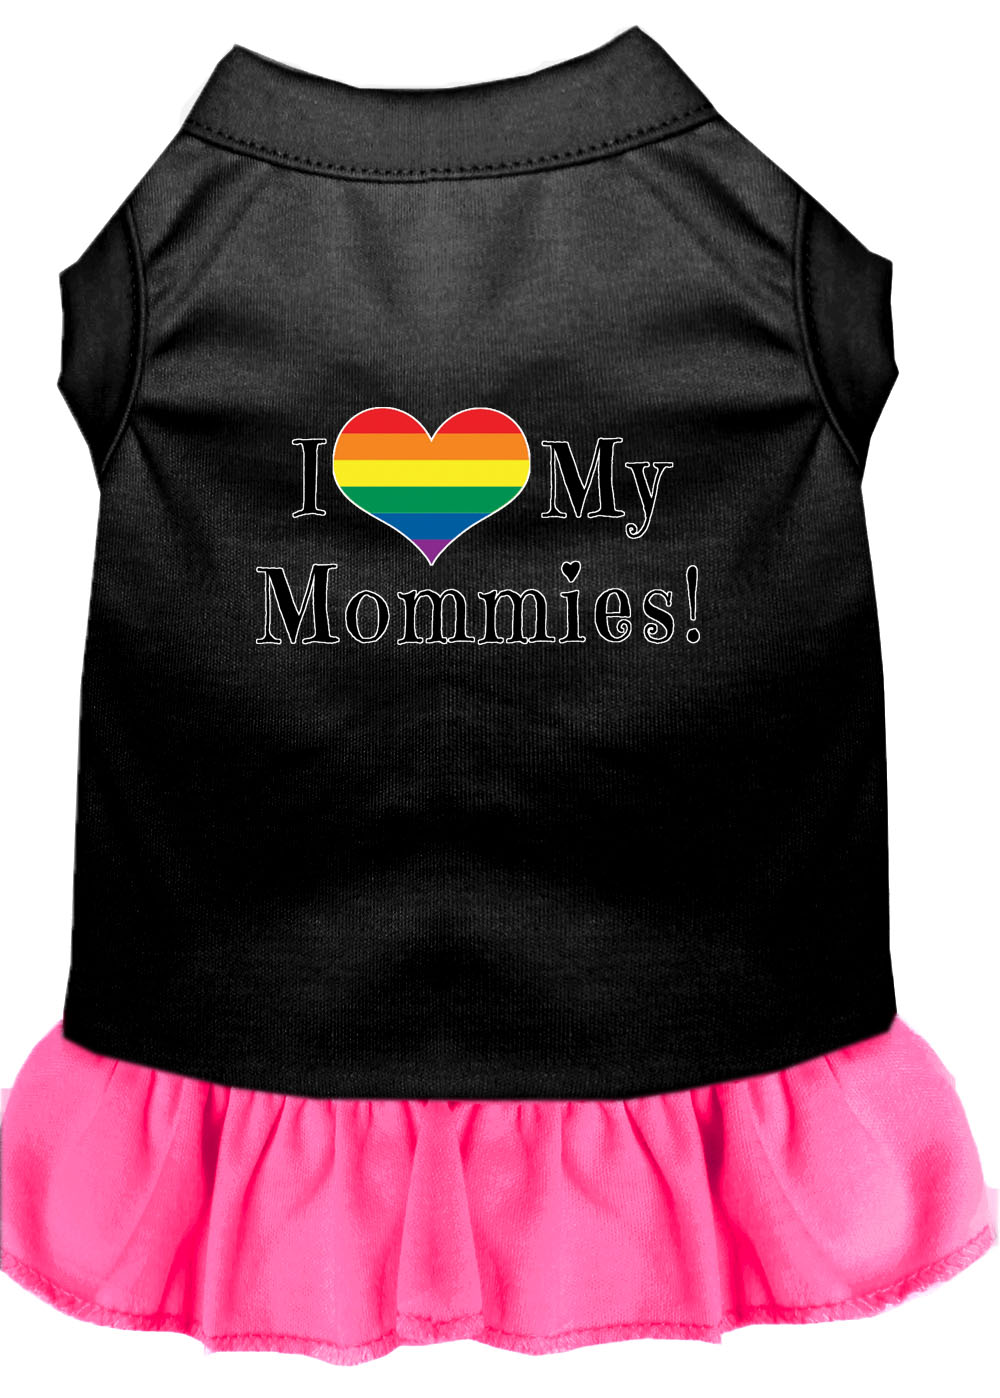 I Heart my Mommies Screen Print Dog Dress Black with Bright Pink XS